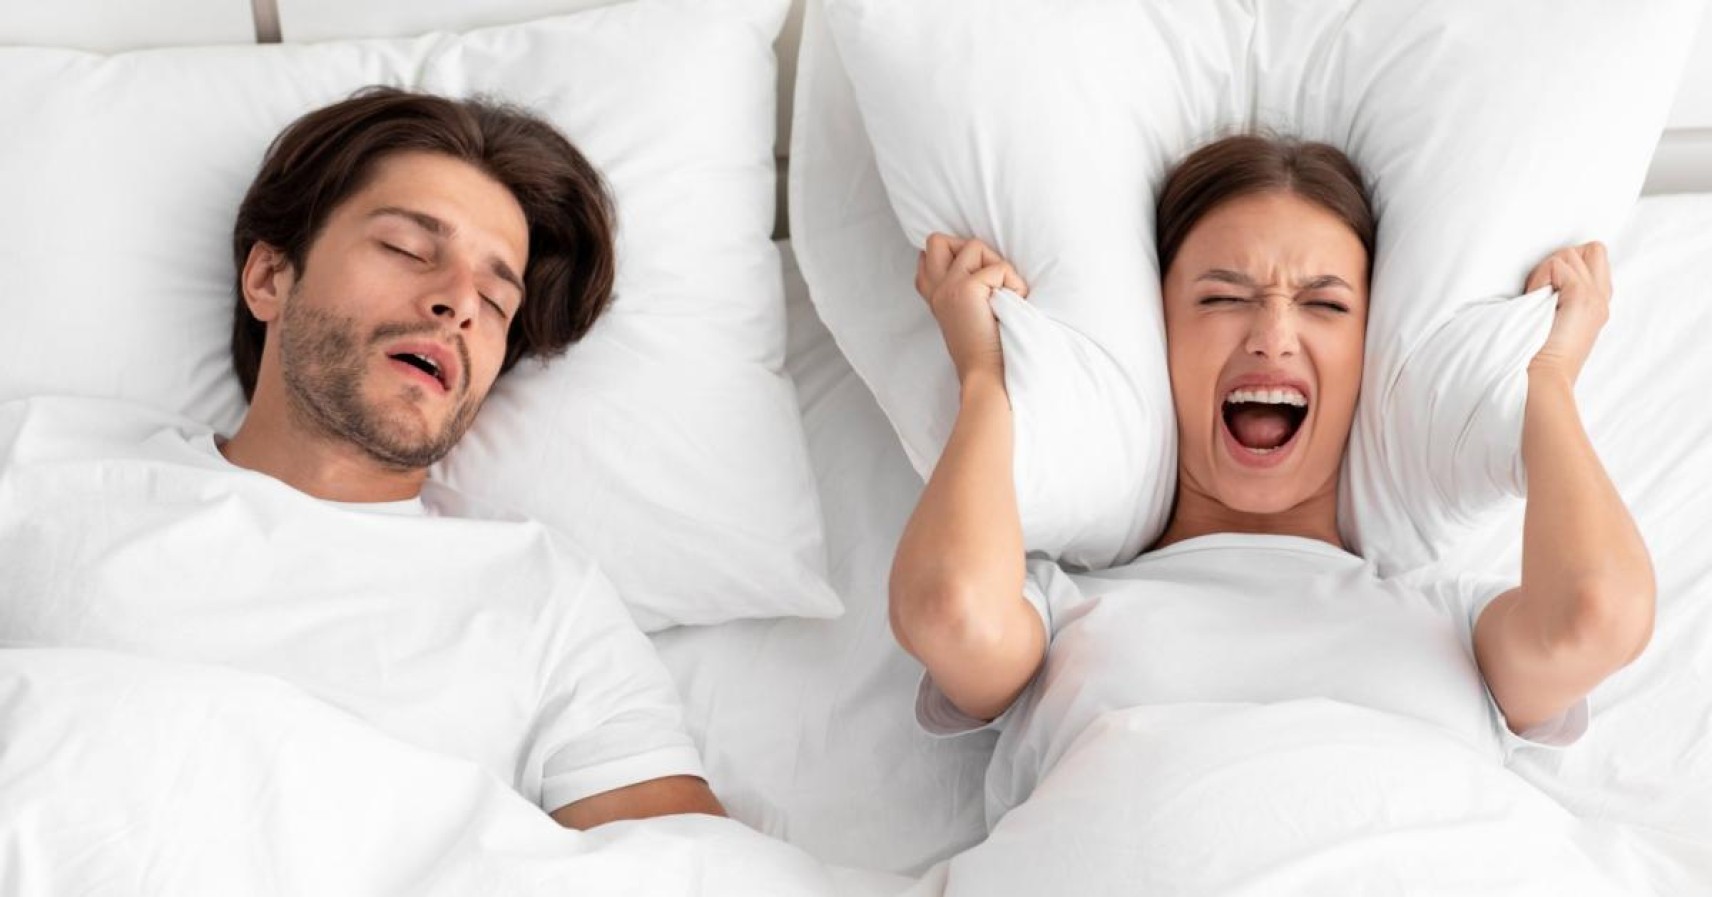 A man sleeping peacefully next to a screaming woman